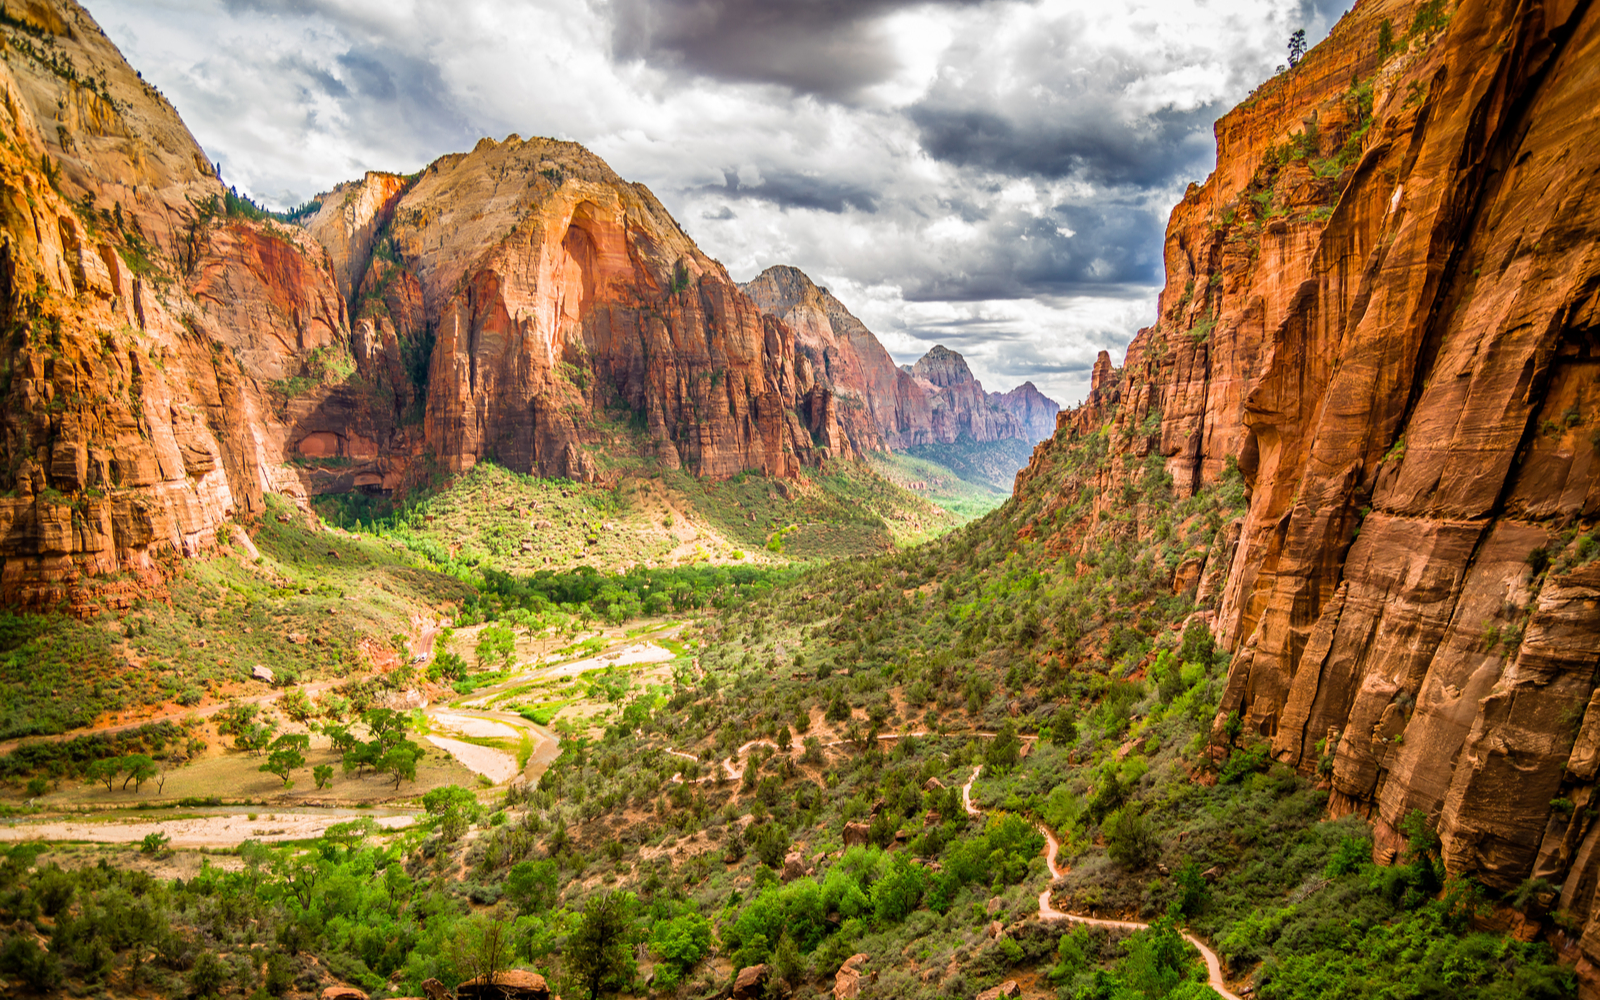 Colorful landscape of the red rocks and green valleys on a cloudy day during the best time to visit Zion National Park